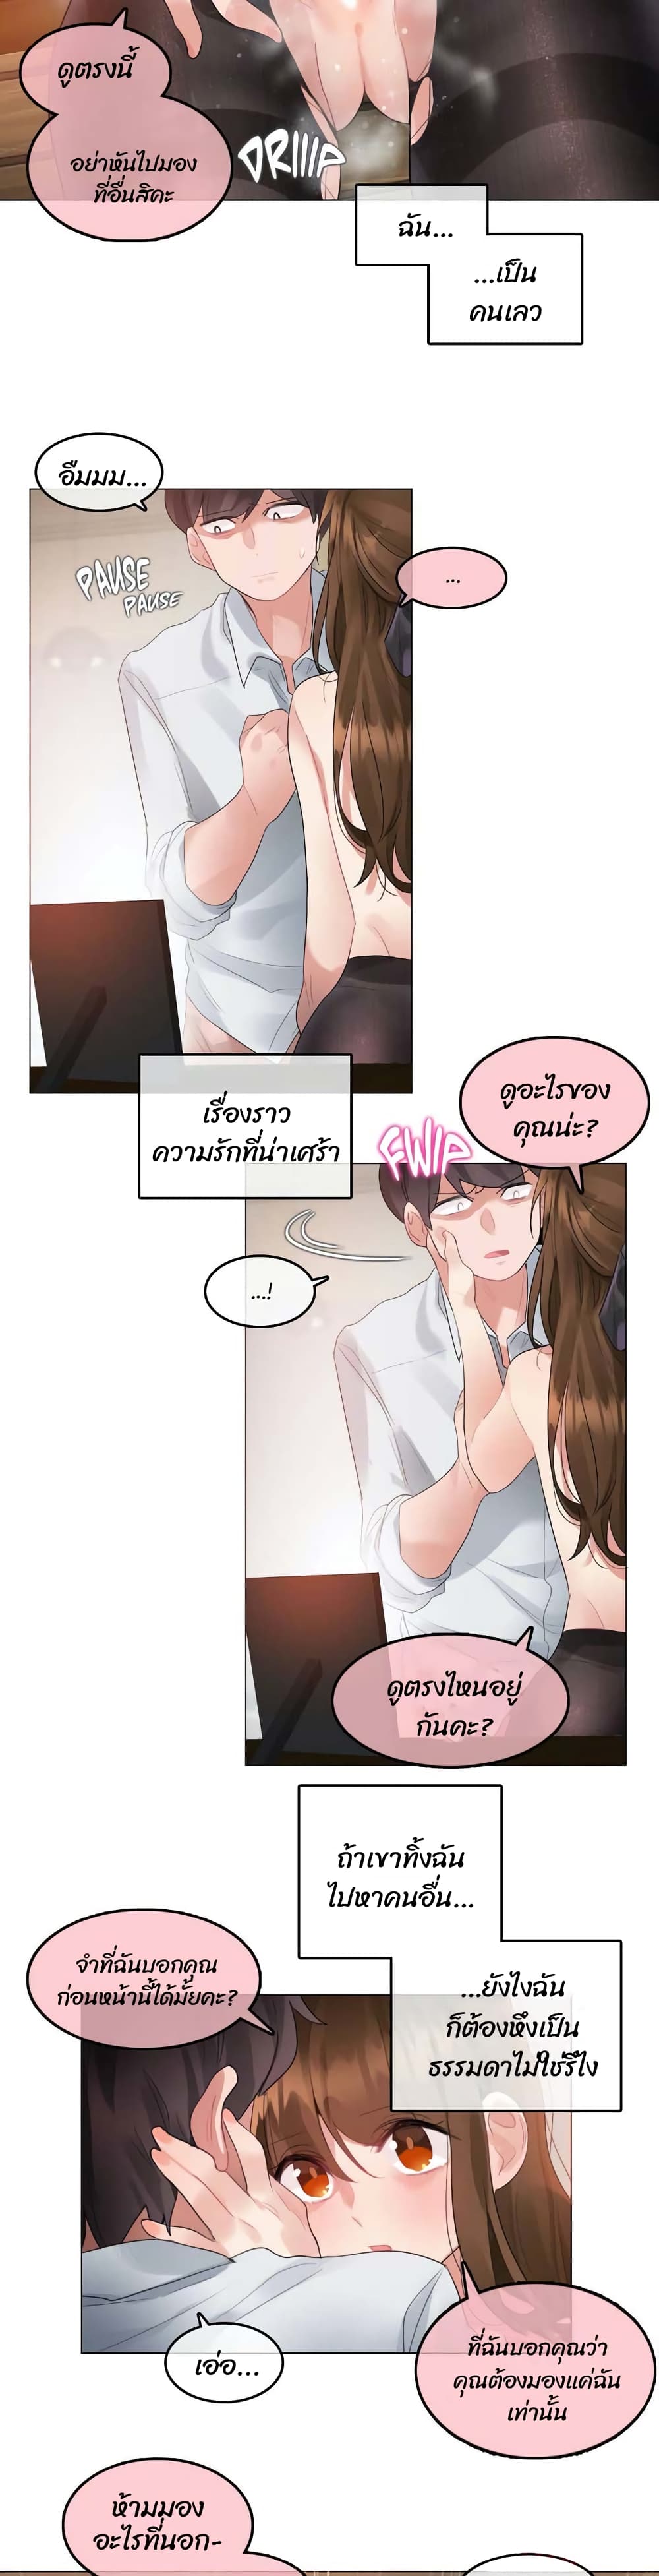 A Pervert's Daily Life 91 (9)